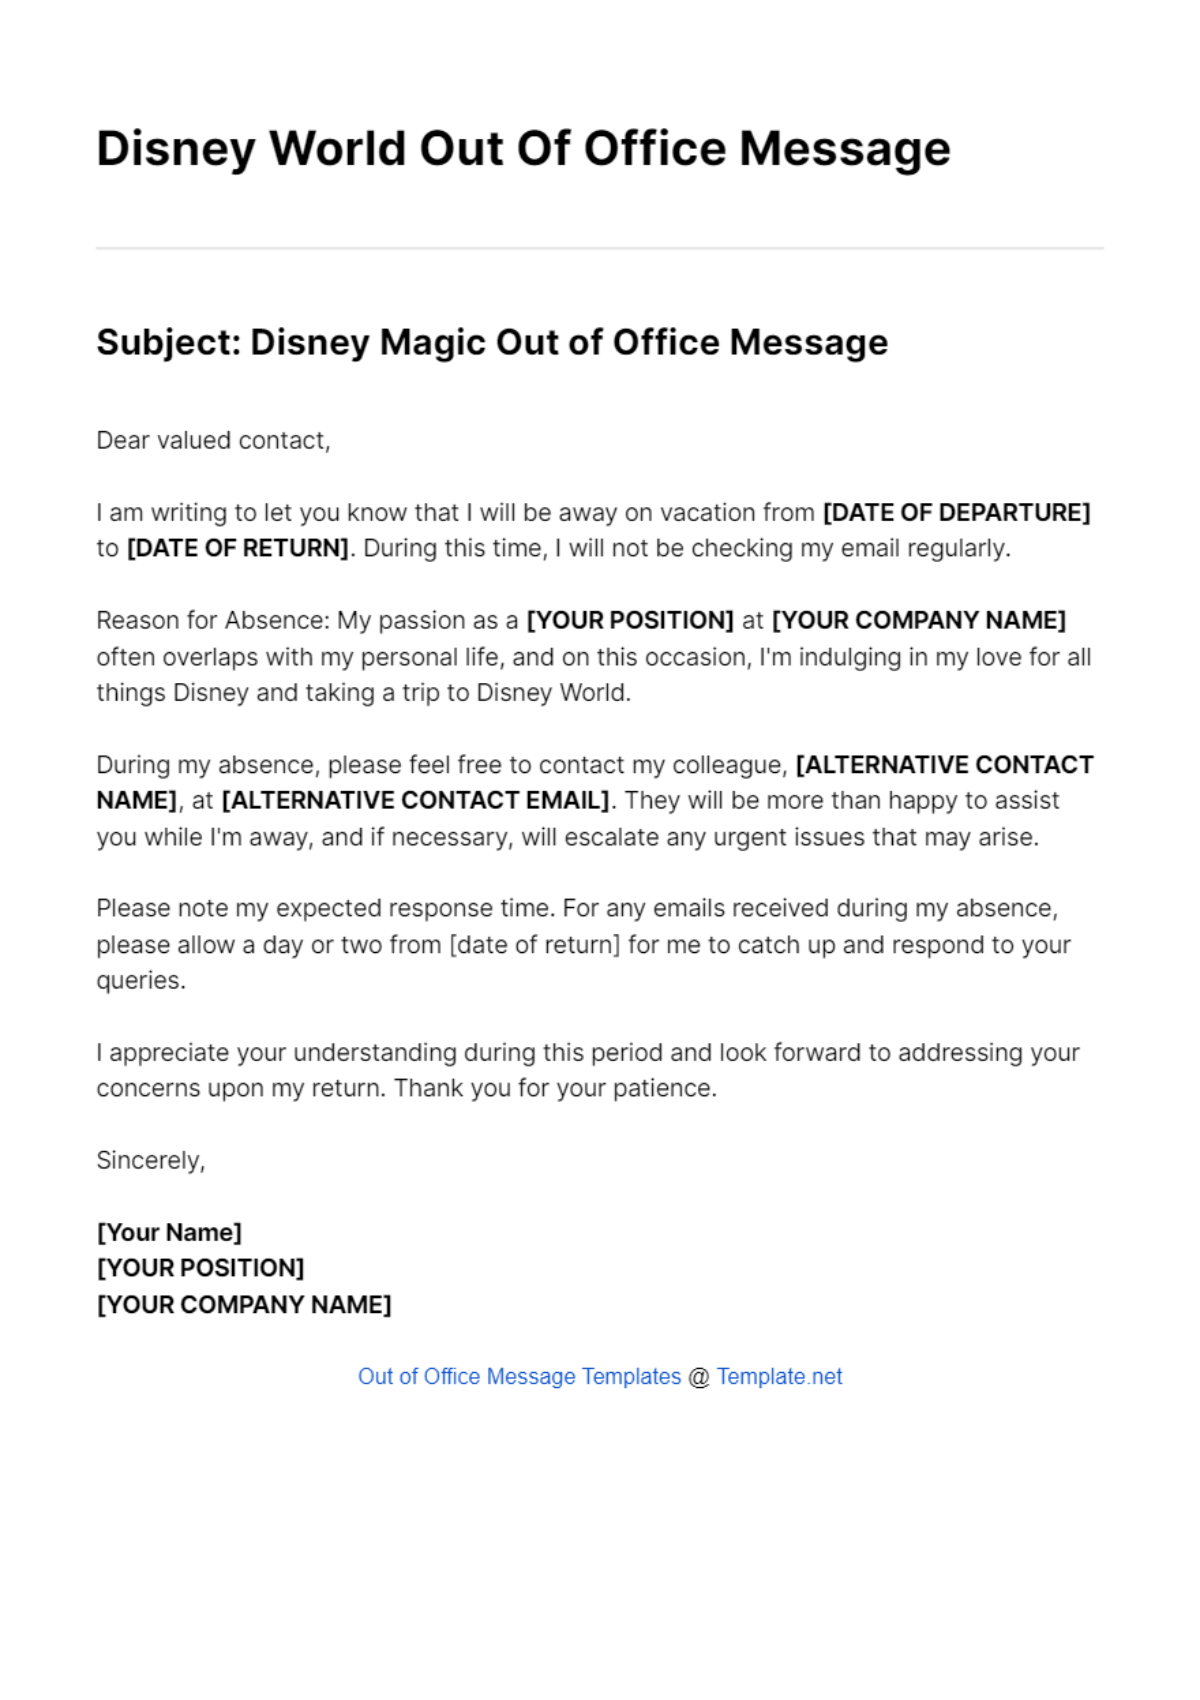 Disney World Out Of Office Message Template